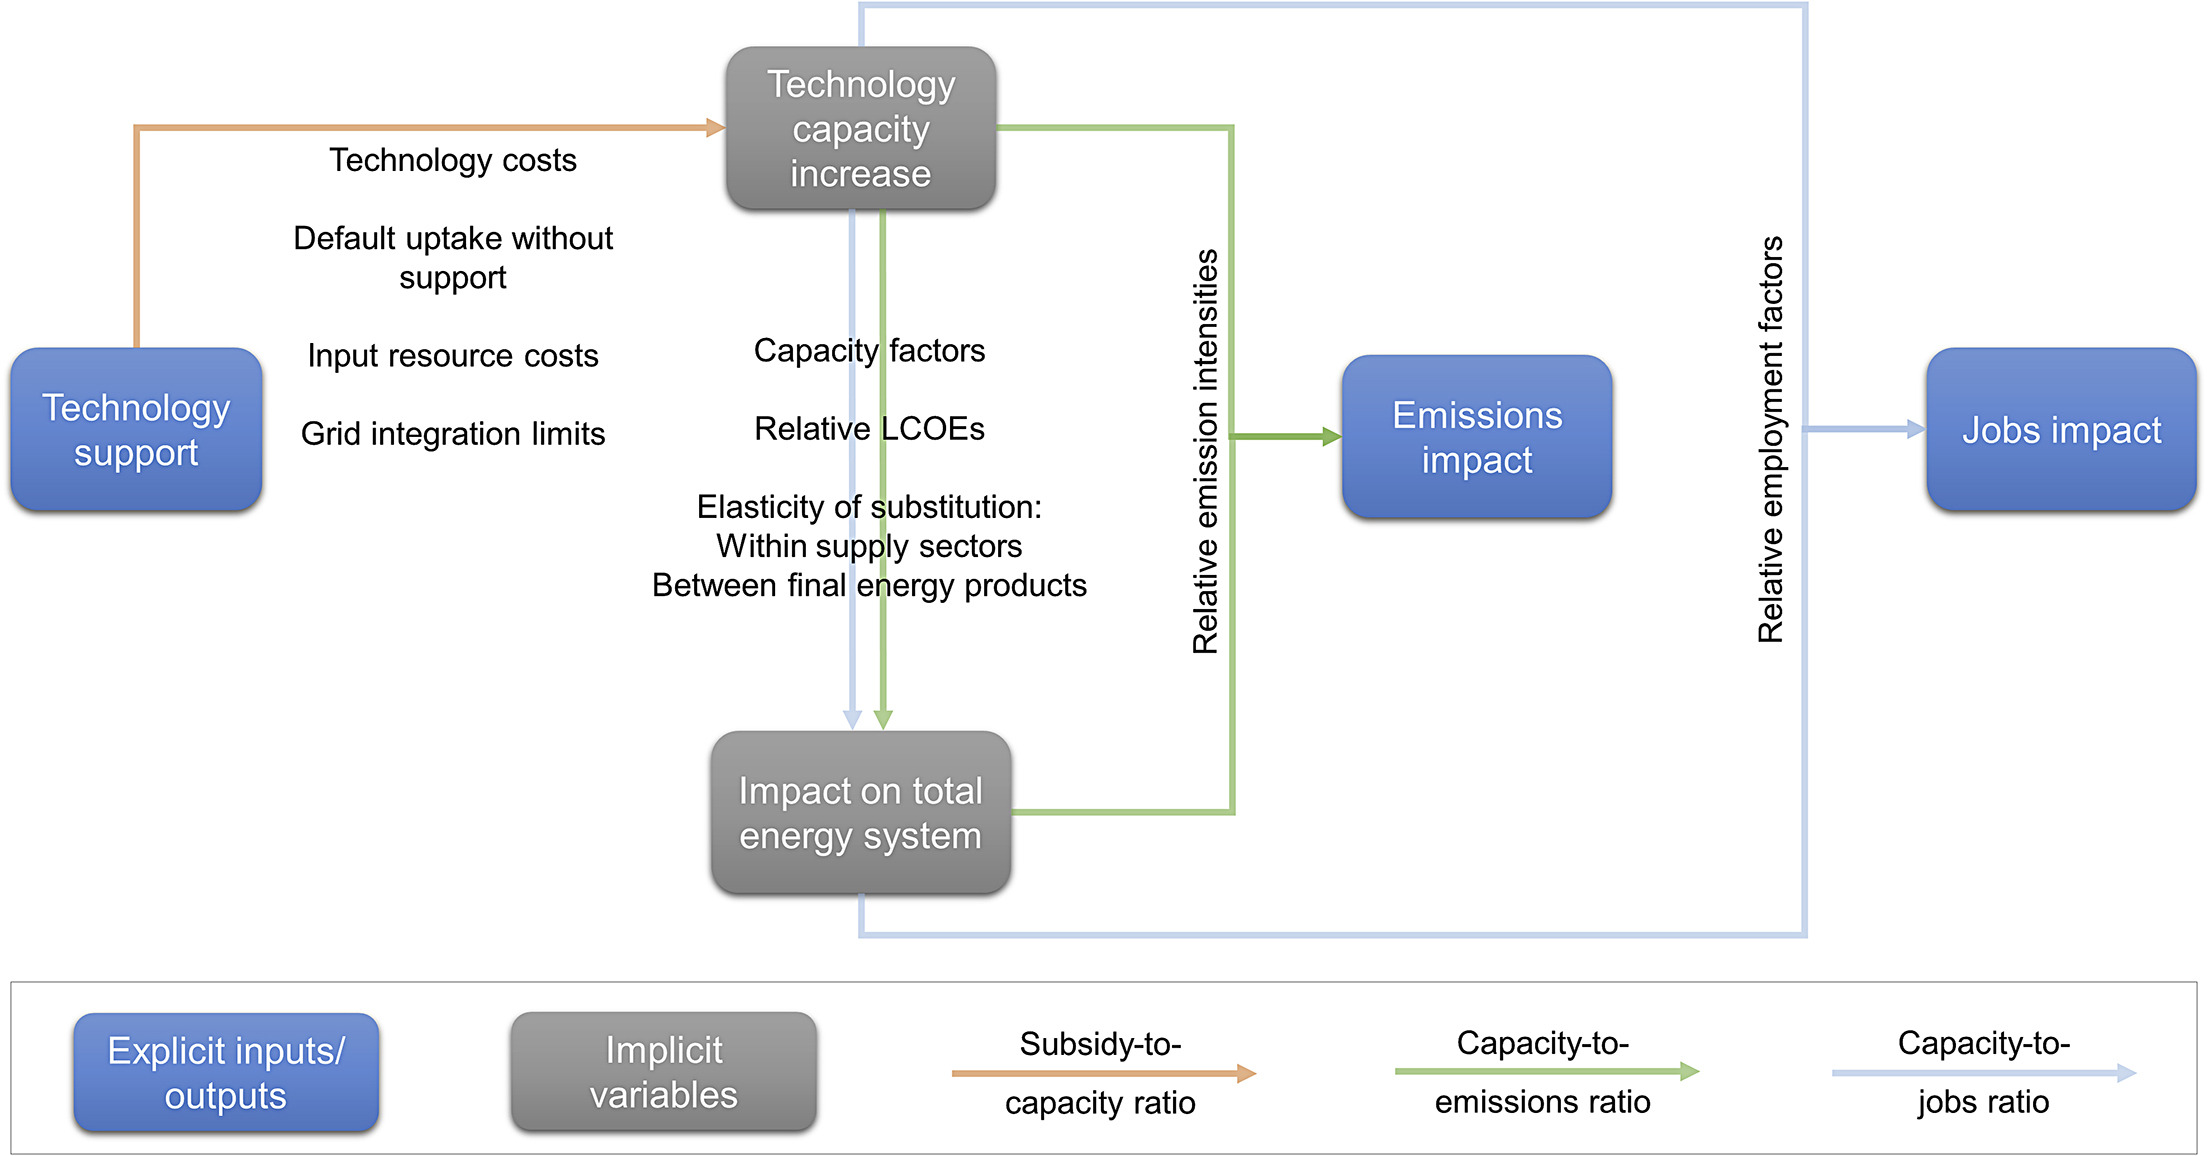 Technology support impacts on emissions and employment